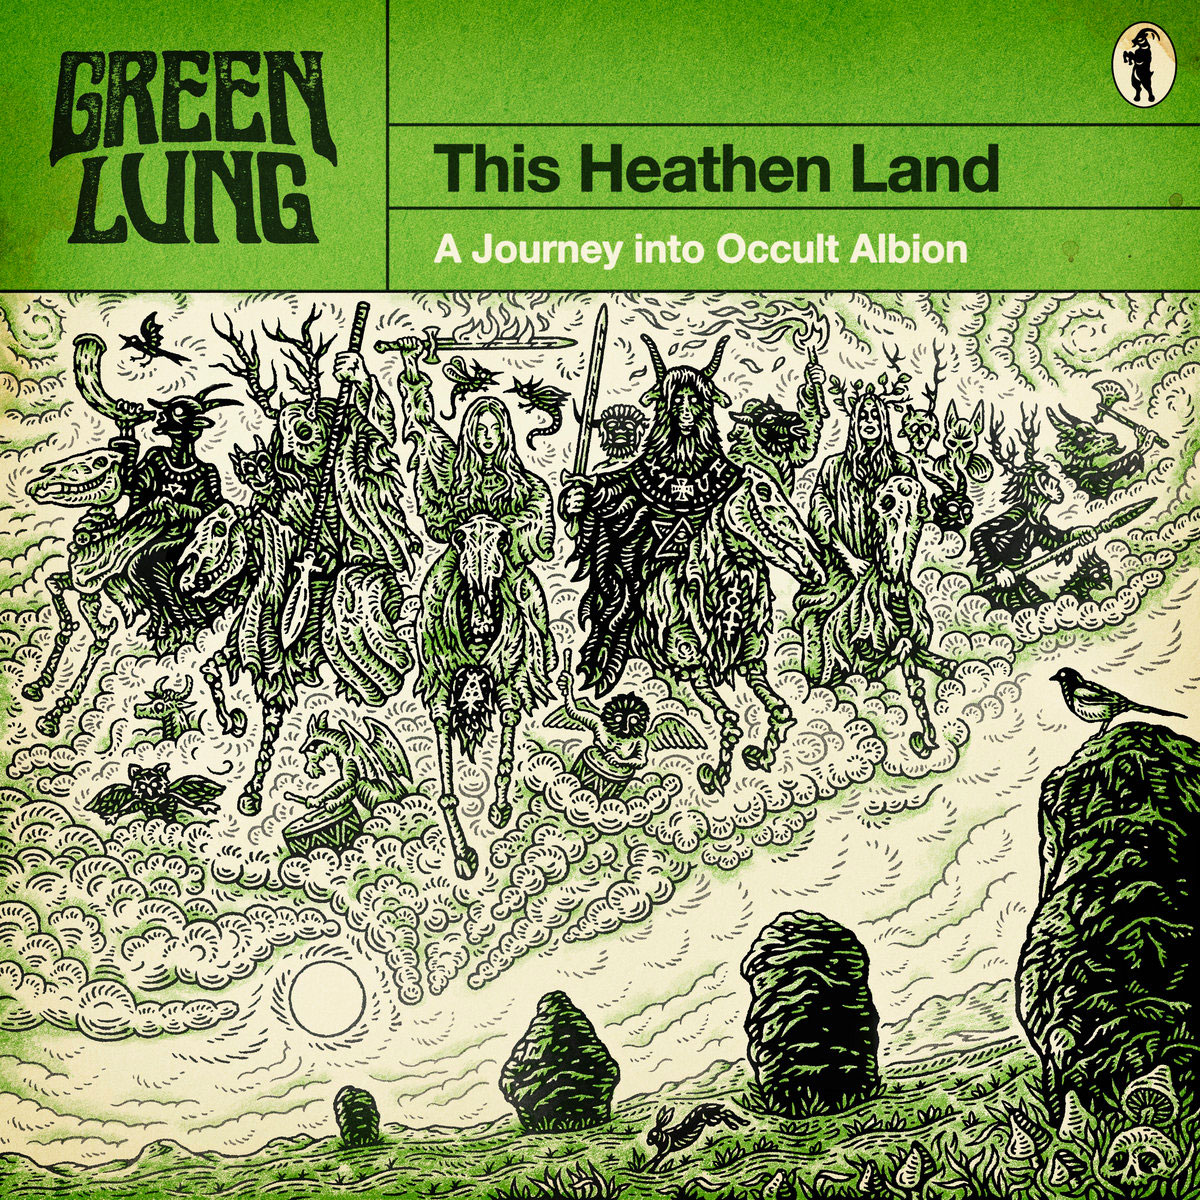 This Heathen Land by Green Lung